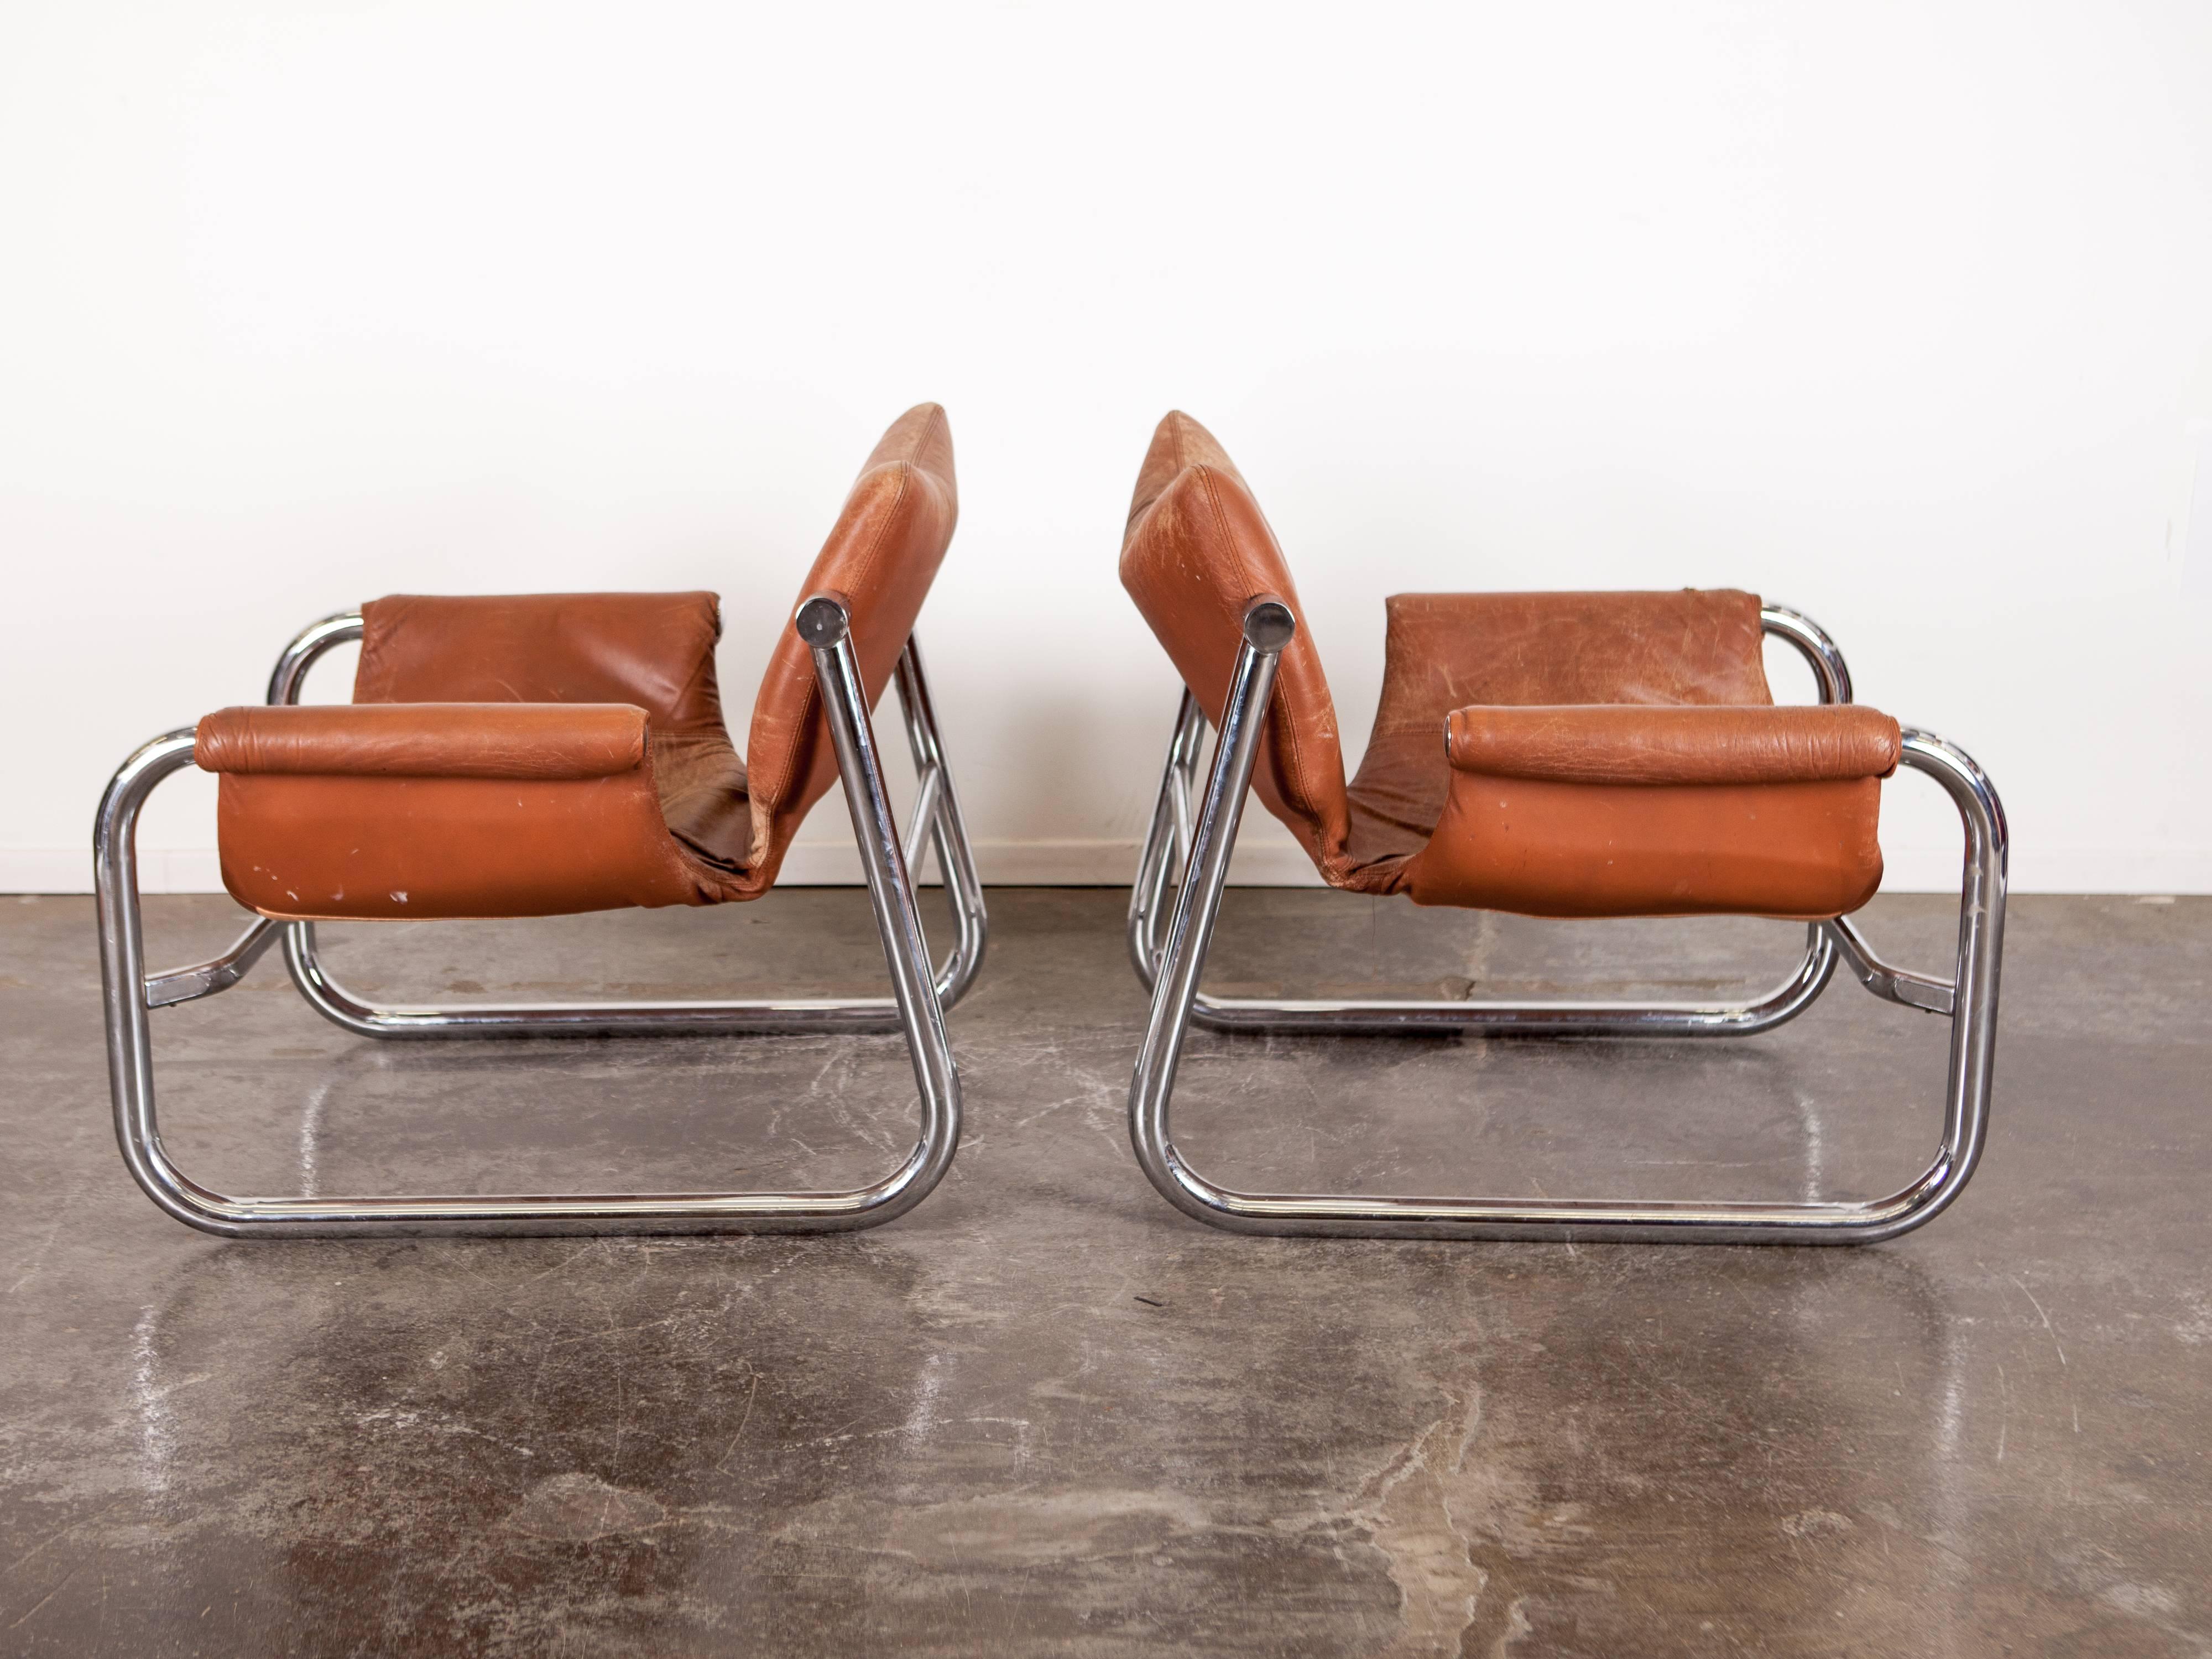 Pair of chrome and brown leather chairs with a sling seat with a pivoting back, designed by Maurice Burke, called the 'Alpha Chair'. Very nice patina on the leather, they were manufactured by Pozza Brazil.